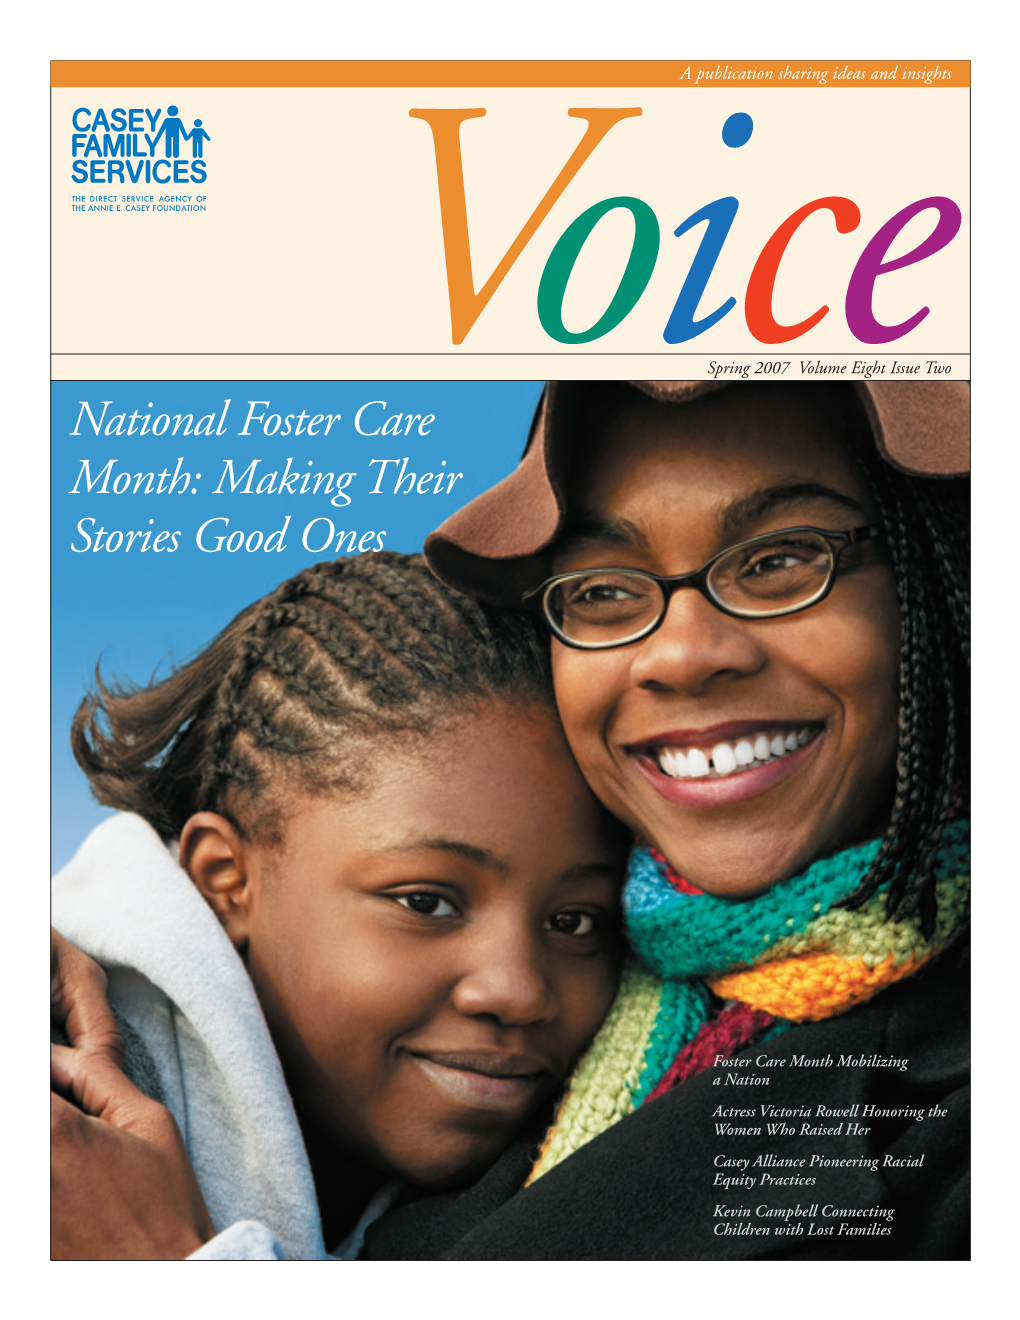 National Foster Care Month: Making Their Stories Good Ones